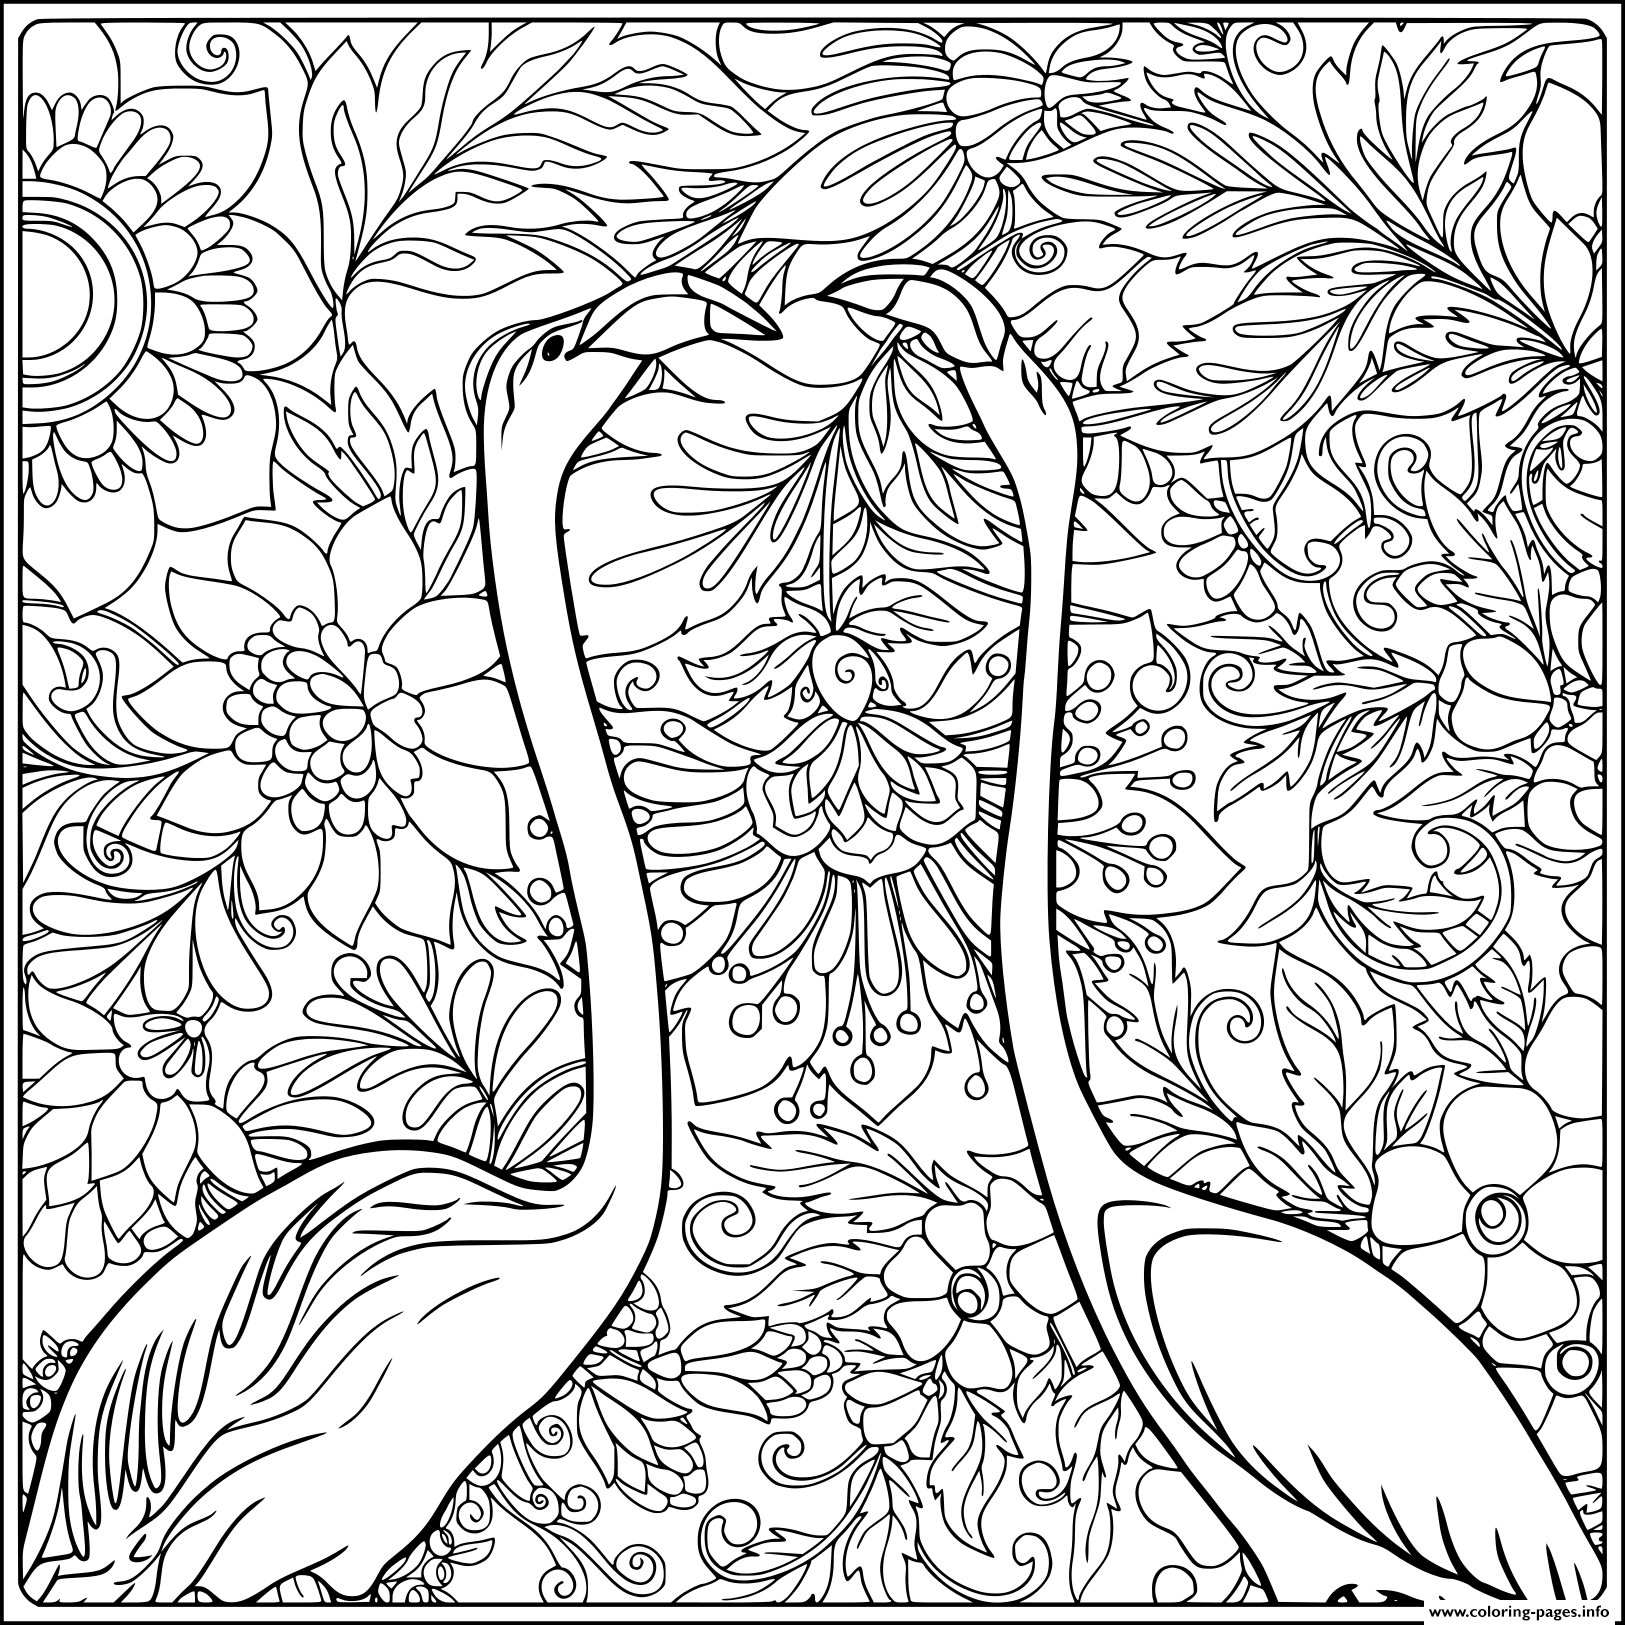 Flamingo In Fantasy Flower Garden Outline Hand Drawing Good coloring